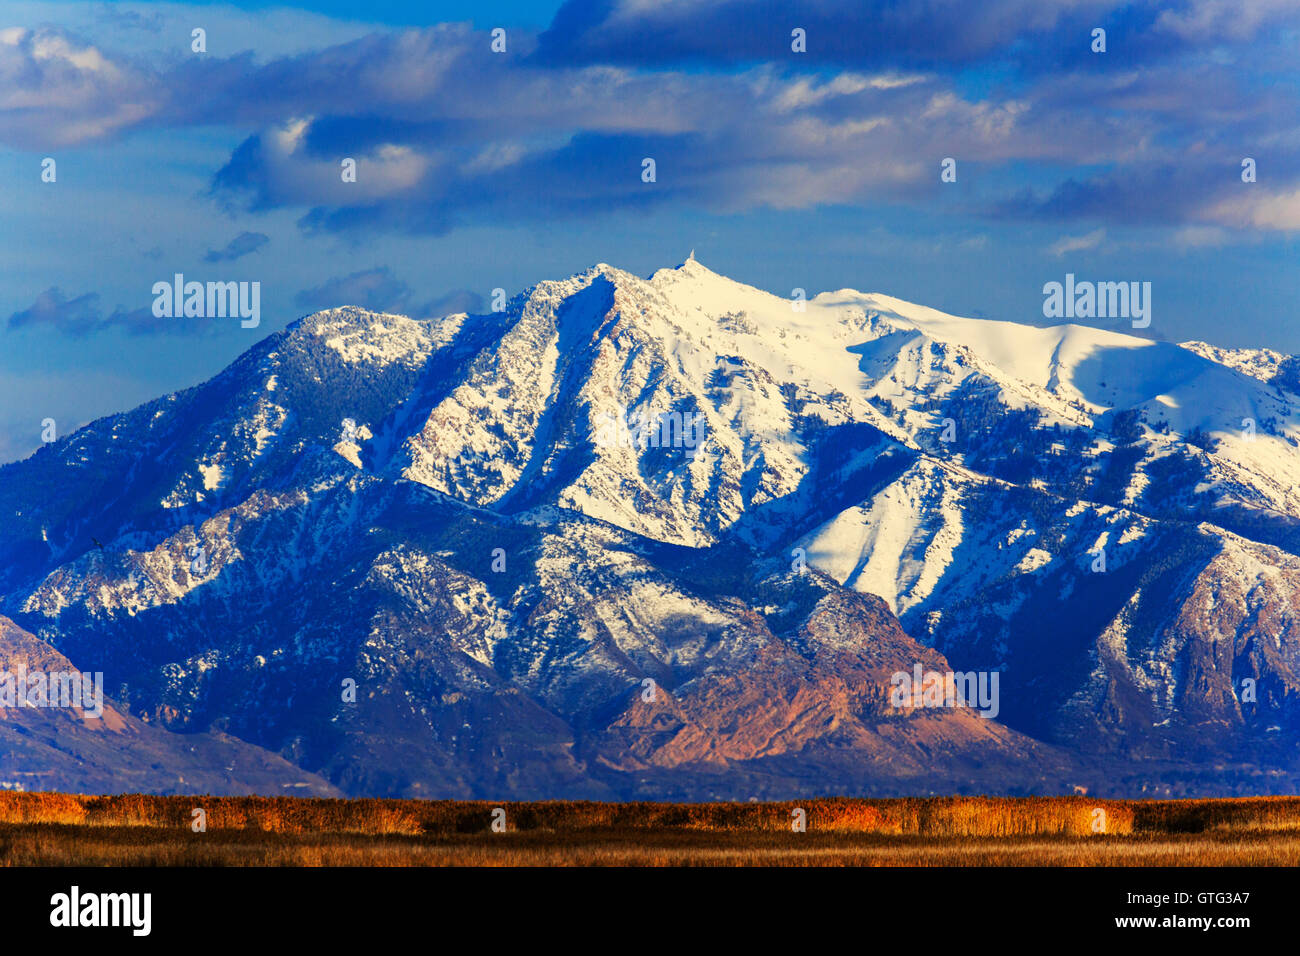 this-is-a-view-of-mount-ogden-as-seen-from-the-bear-river-migratory-GTG3A7.jpg